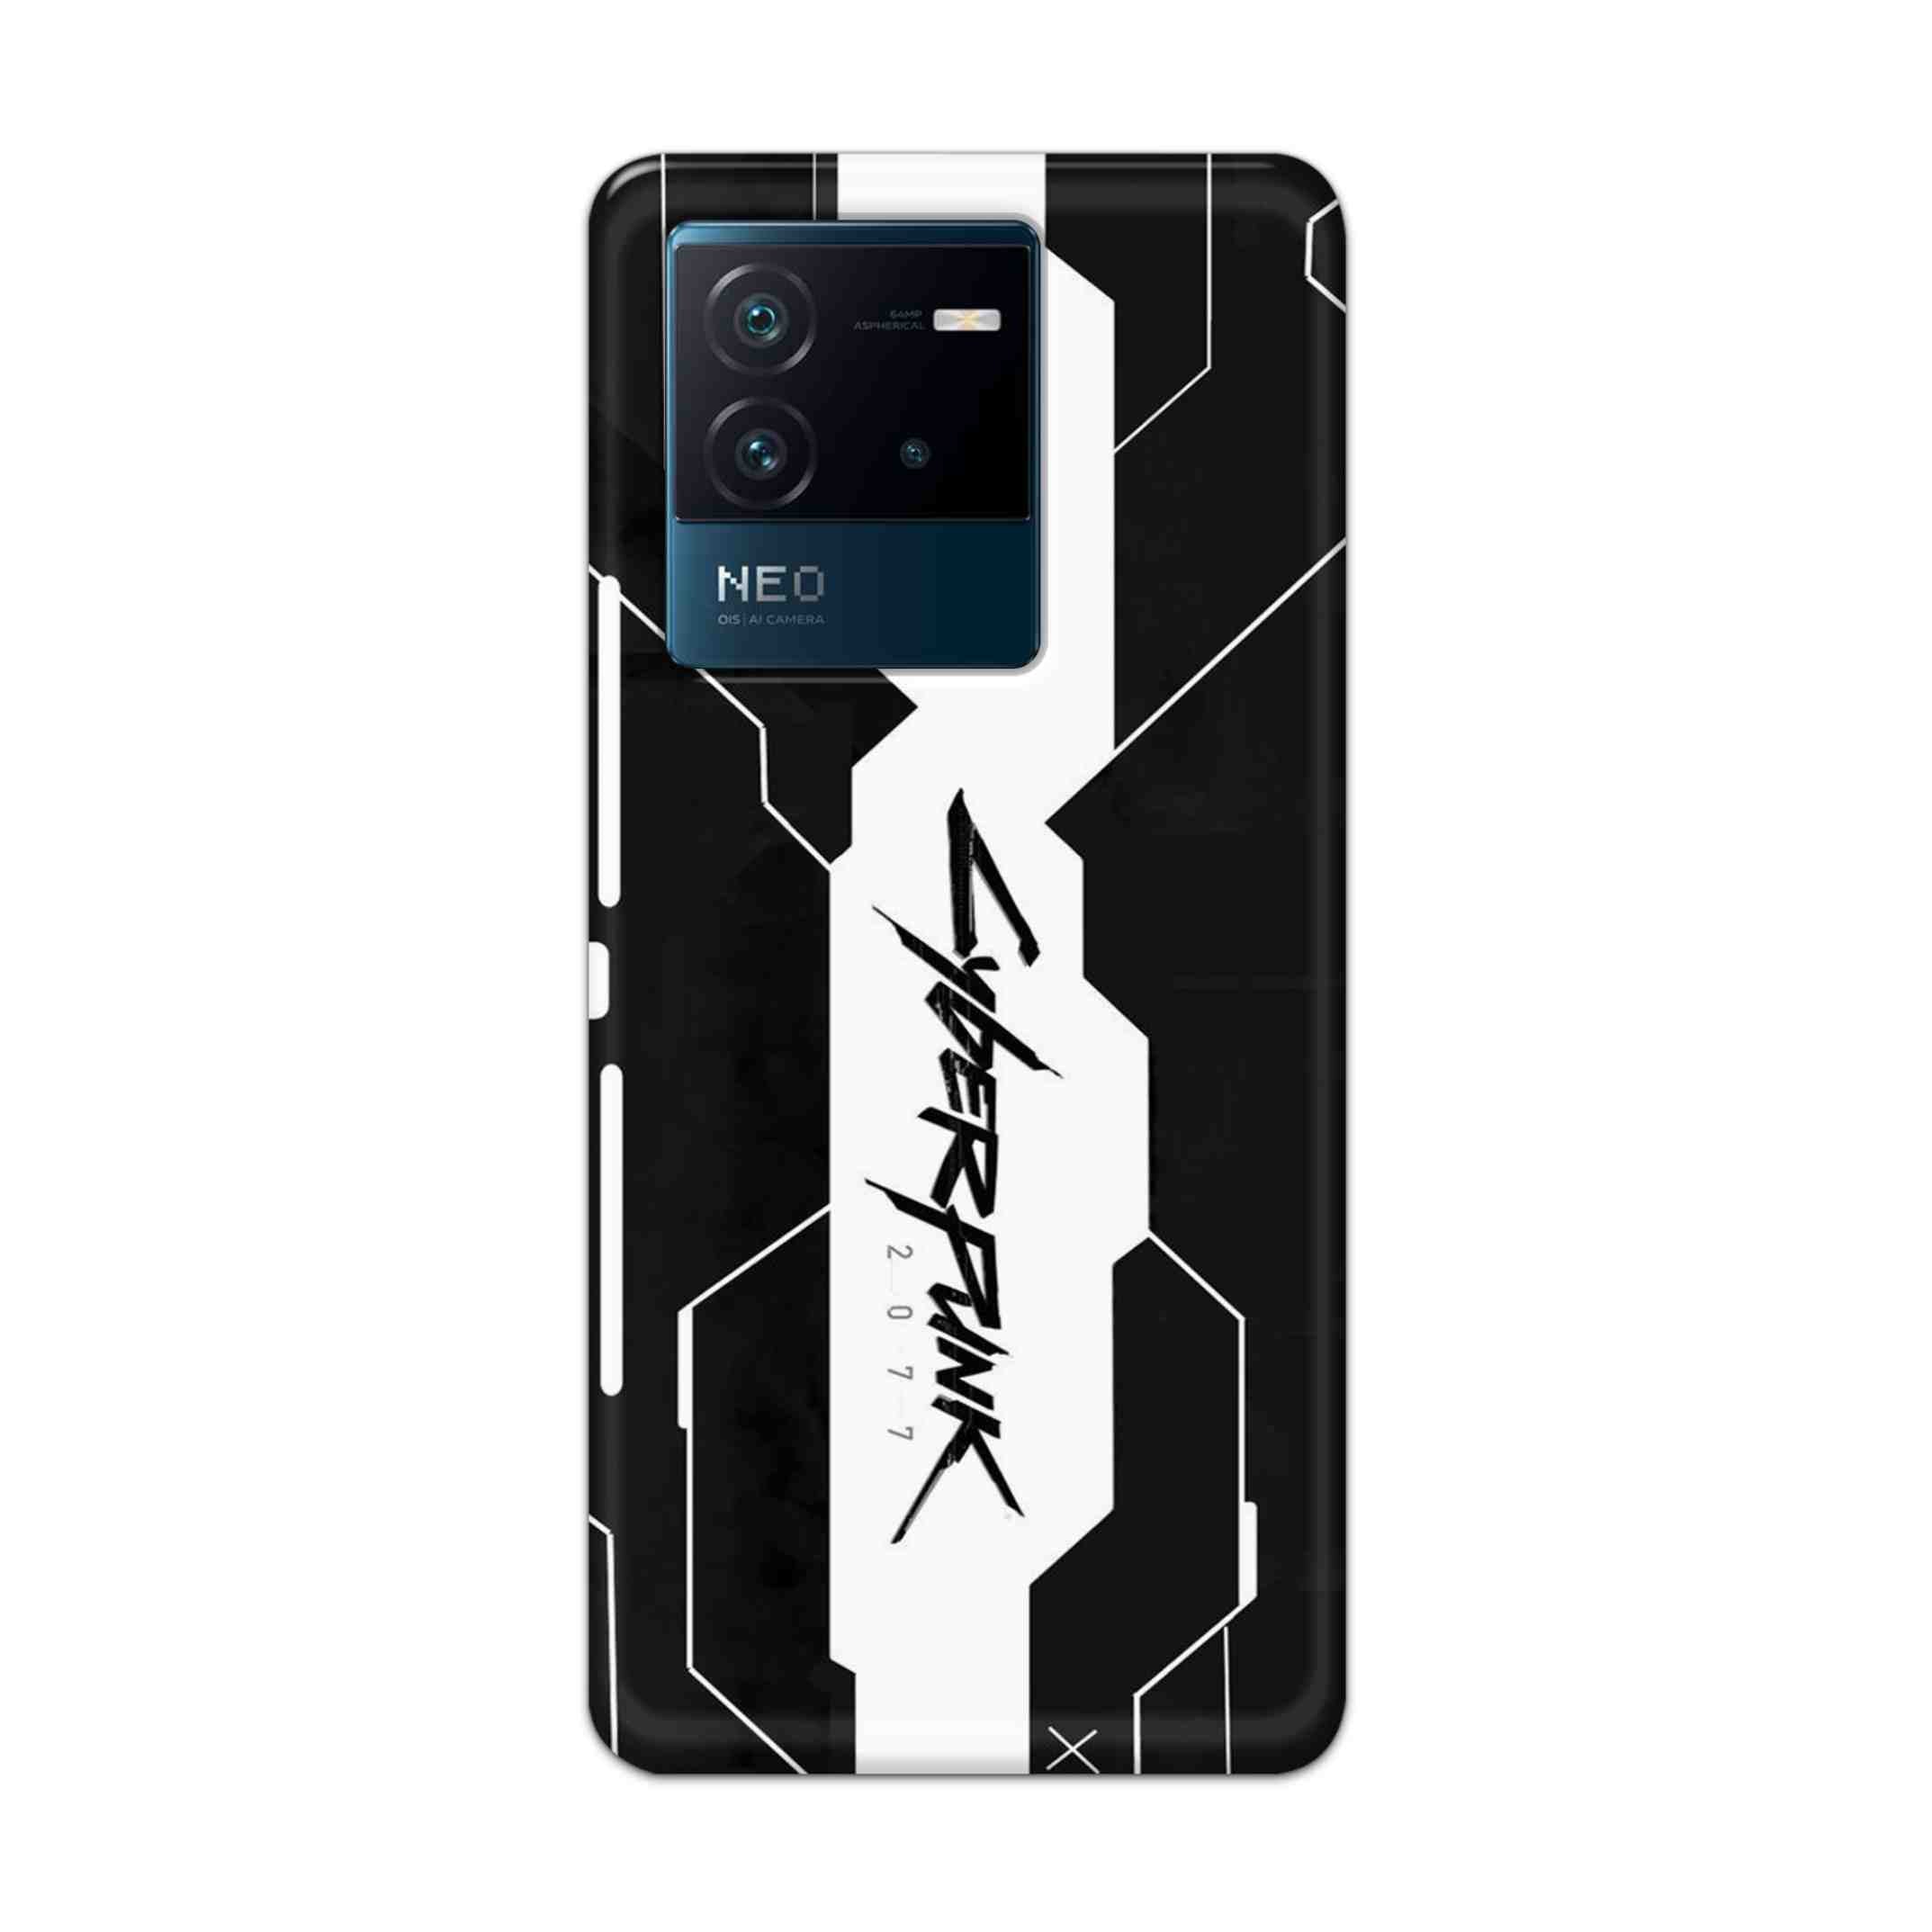 Buy Cyberpunk 2077 Art Hard Back Mobile Phone Case Cover For iQOO Neo 6 5G Online